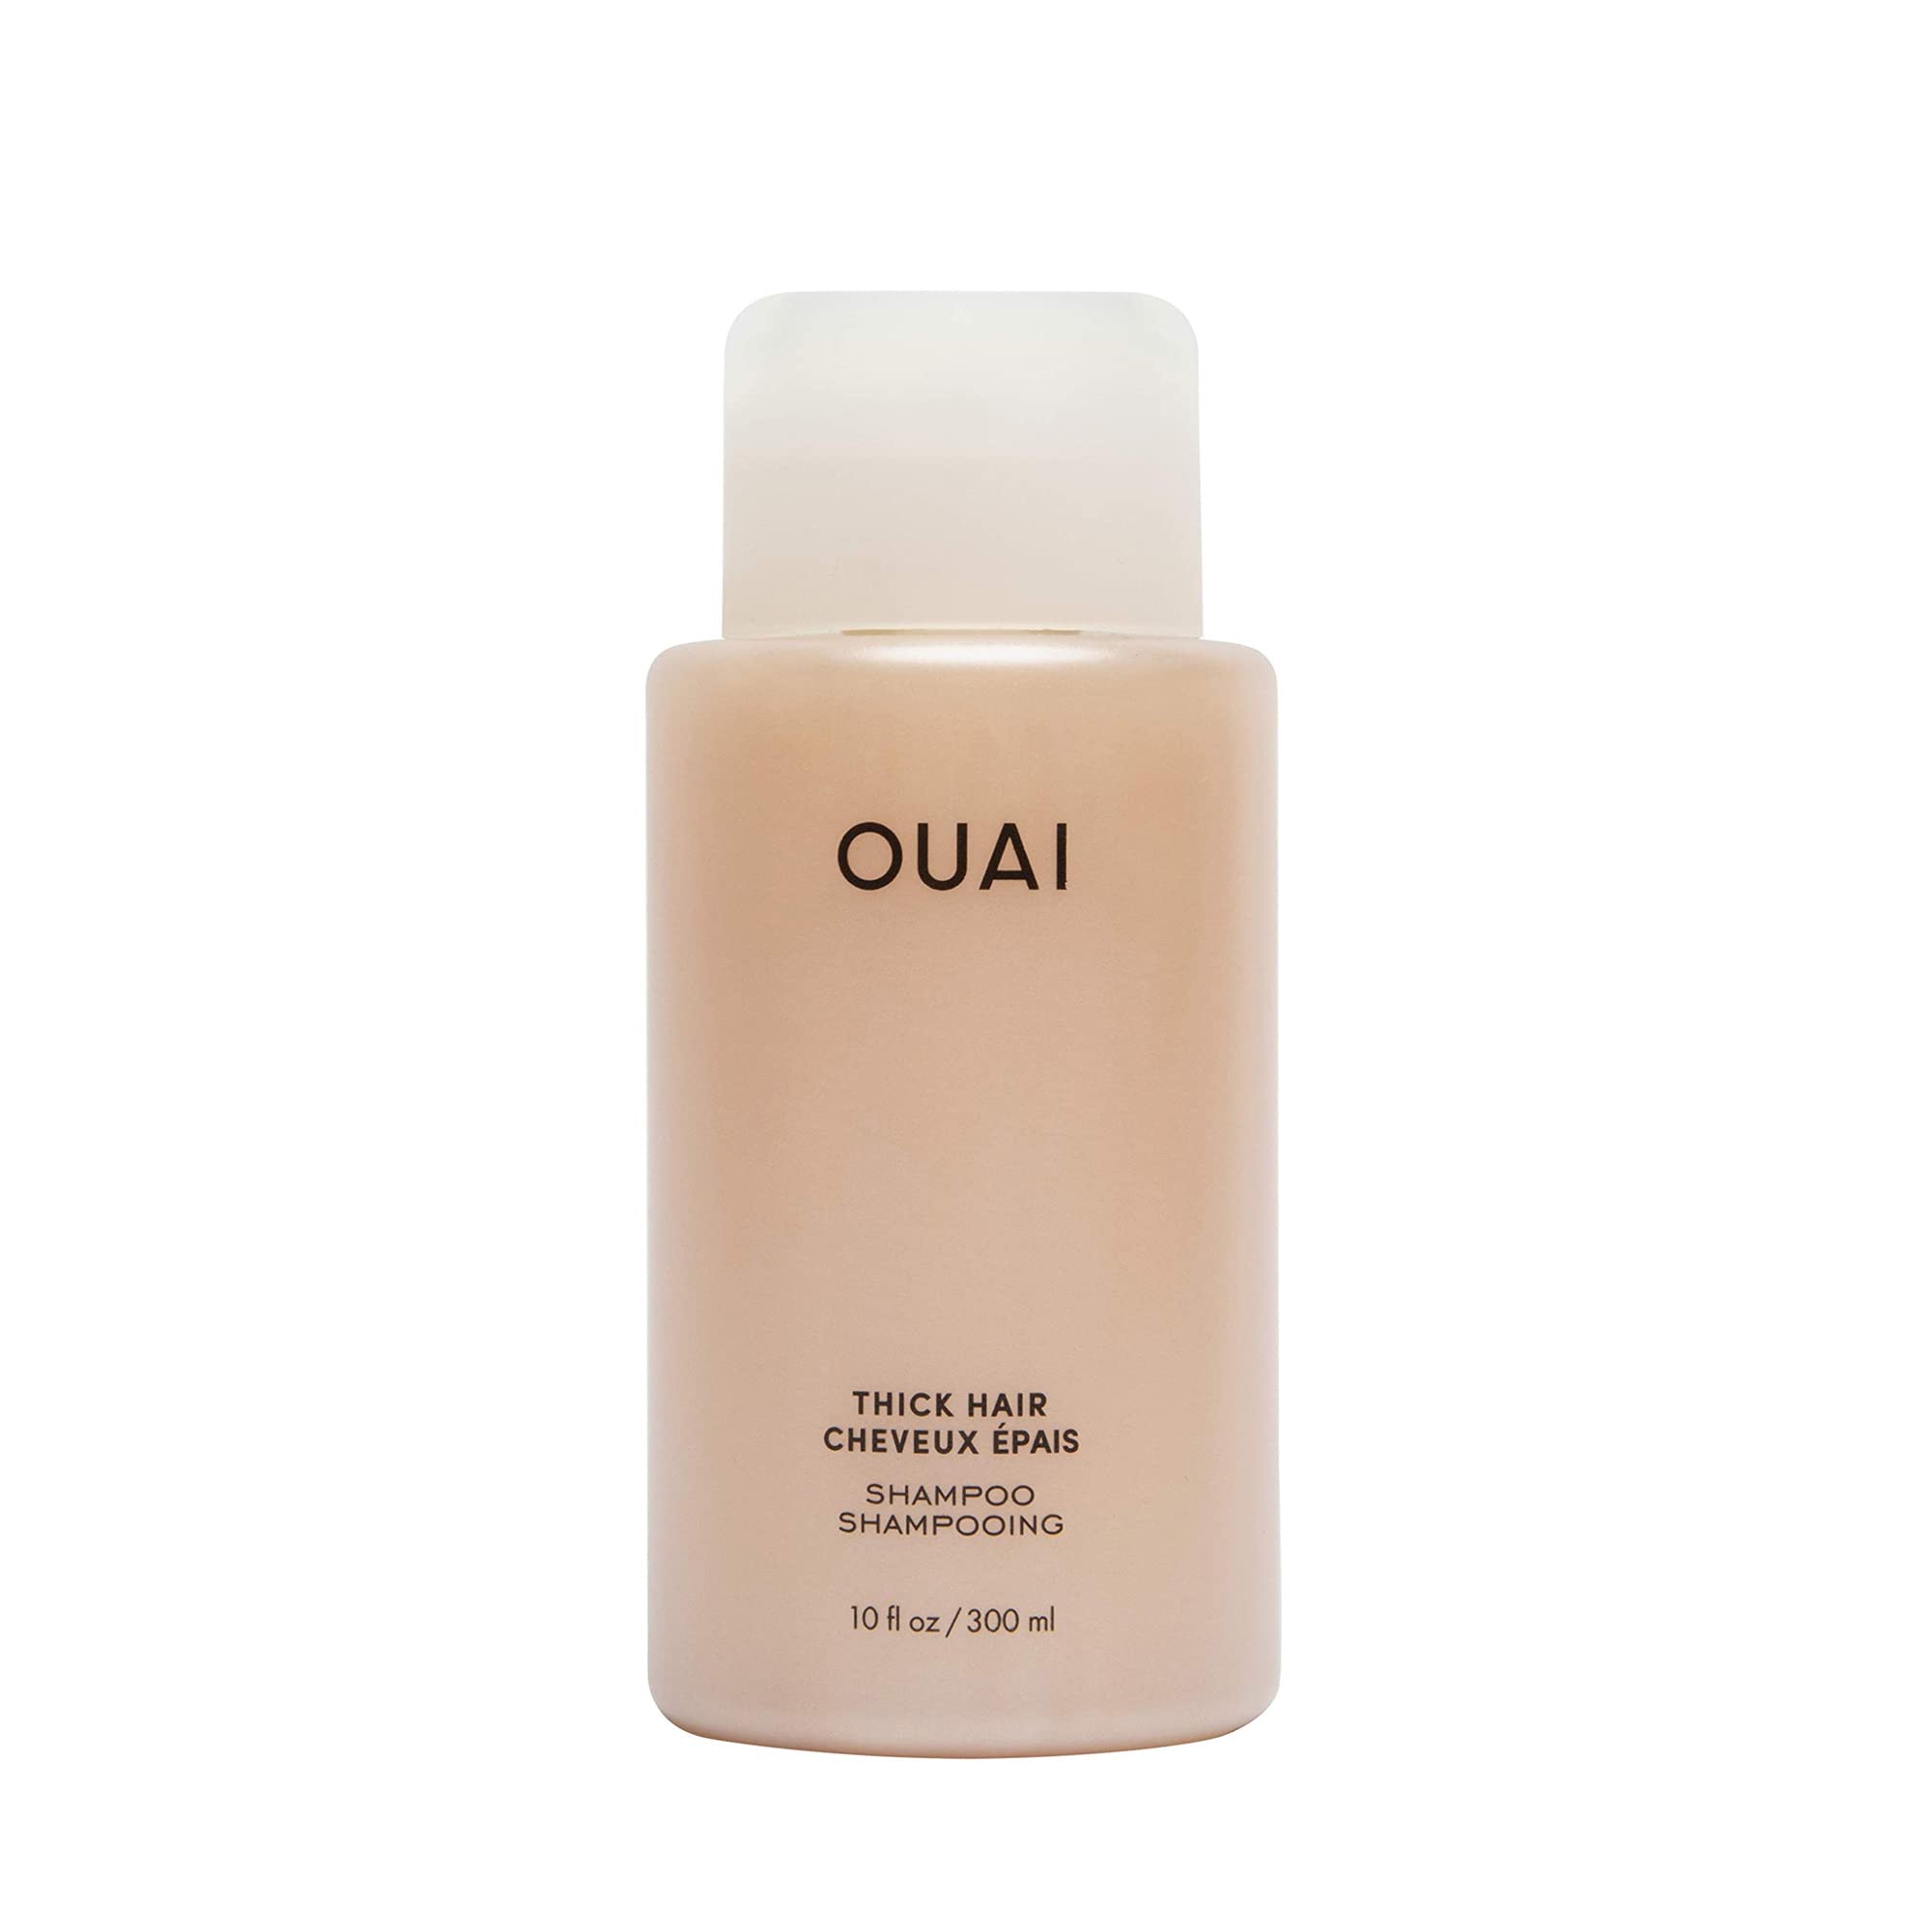 OUAI Thick Shampoo - Fight Frizz and Nourish Dry, Thick Hair with Strengthening Keratin, Marshmallow Root, Shea Butter & Avocado Oil - Free of Parabens, Sulfates & Phthalates - 10 fl oz